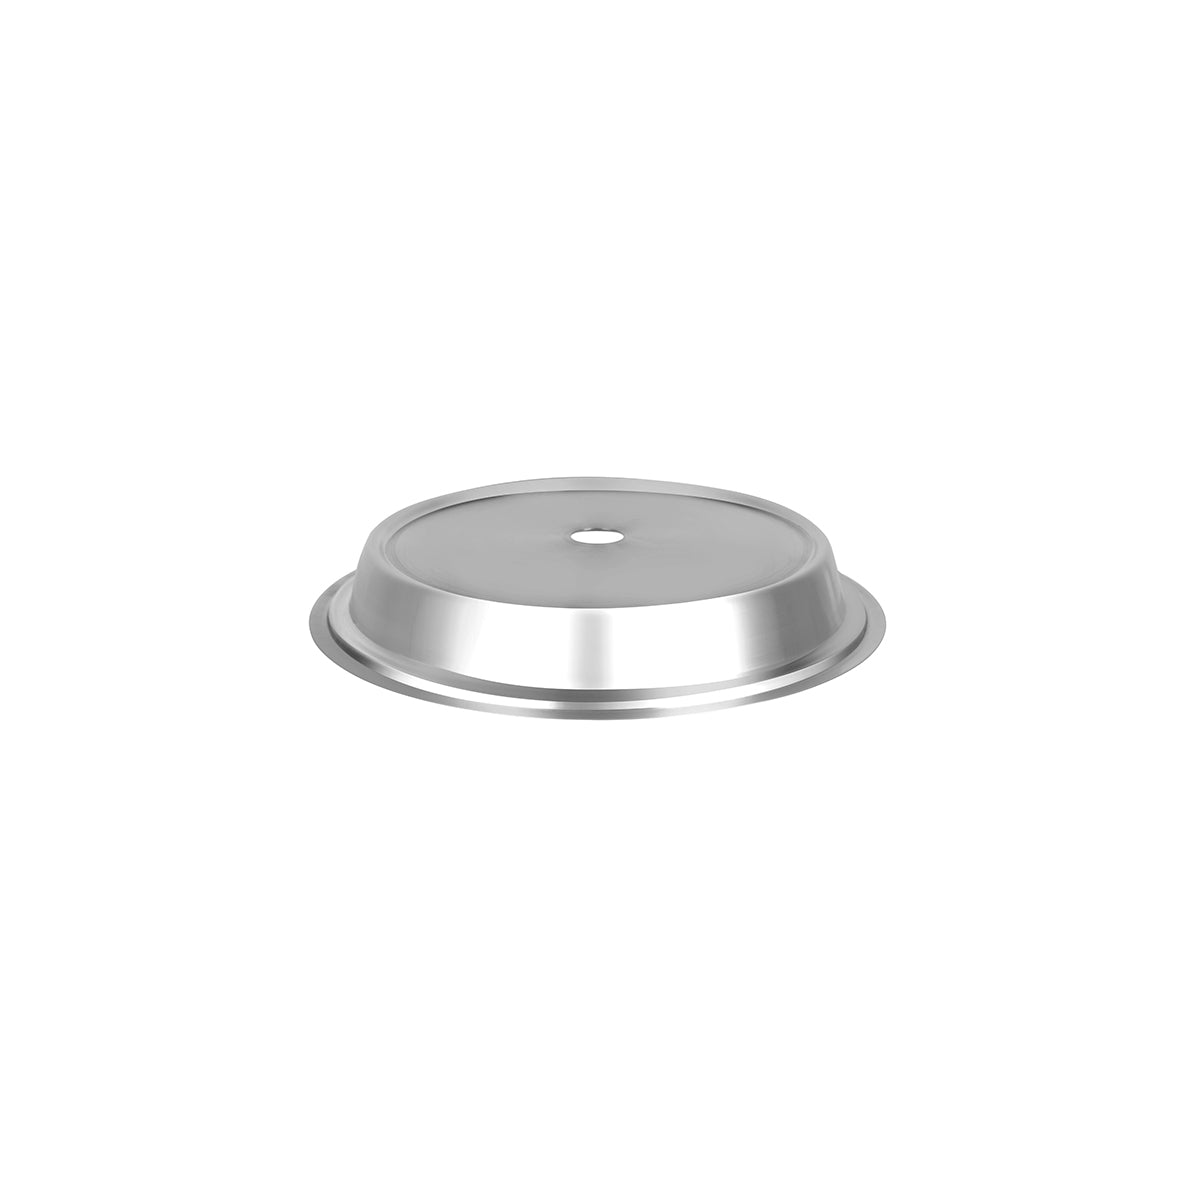 07732 Chef Inox Plate Cover Multi-Fit Stainless Steel 250mm/10" Tomkin Australia Hospitality Supplies